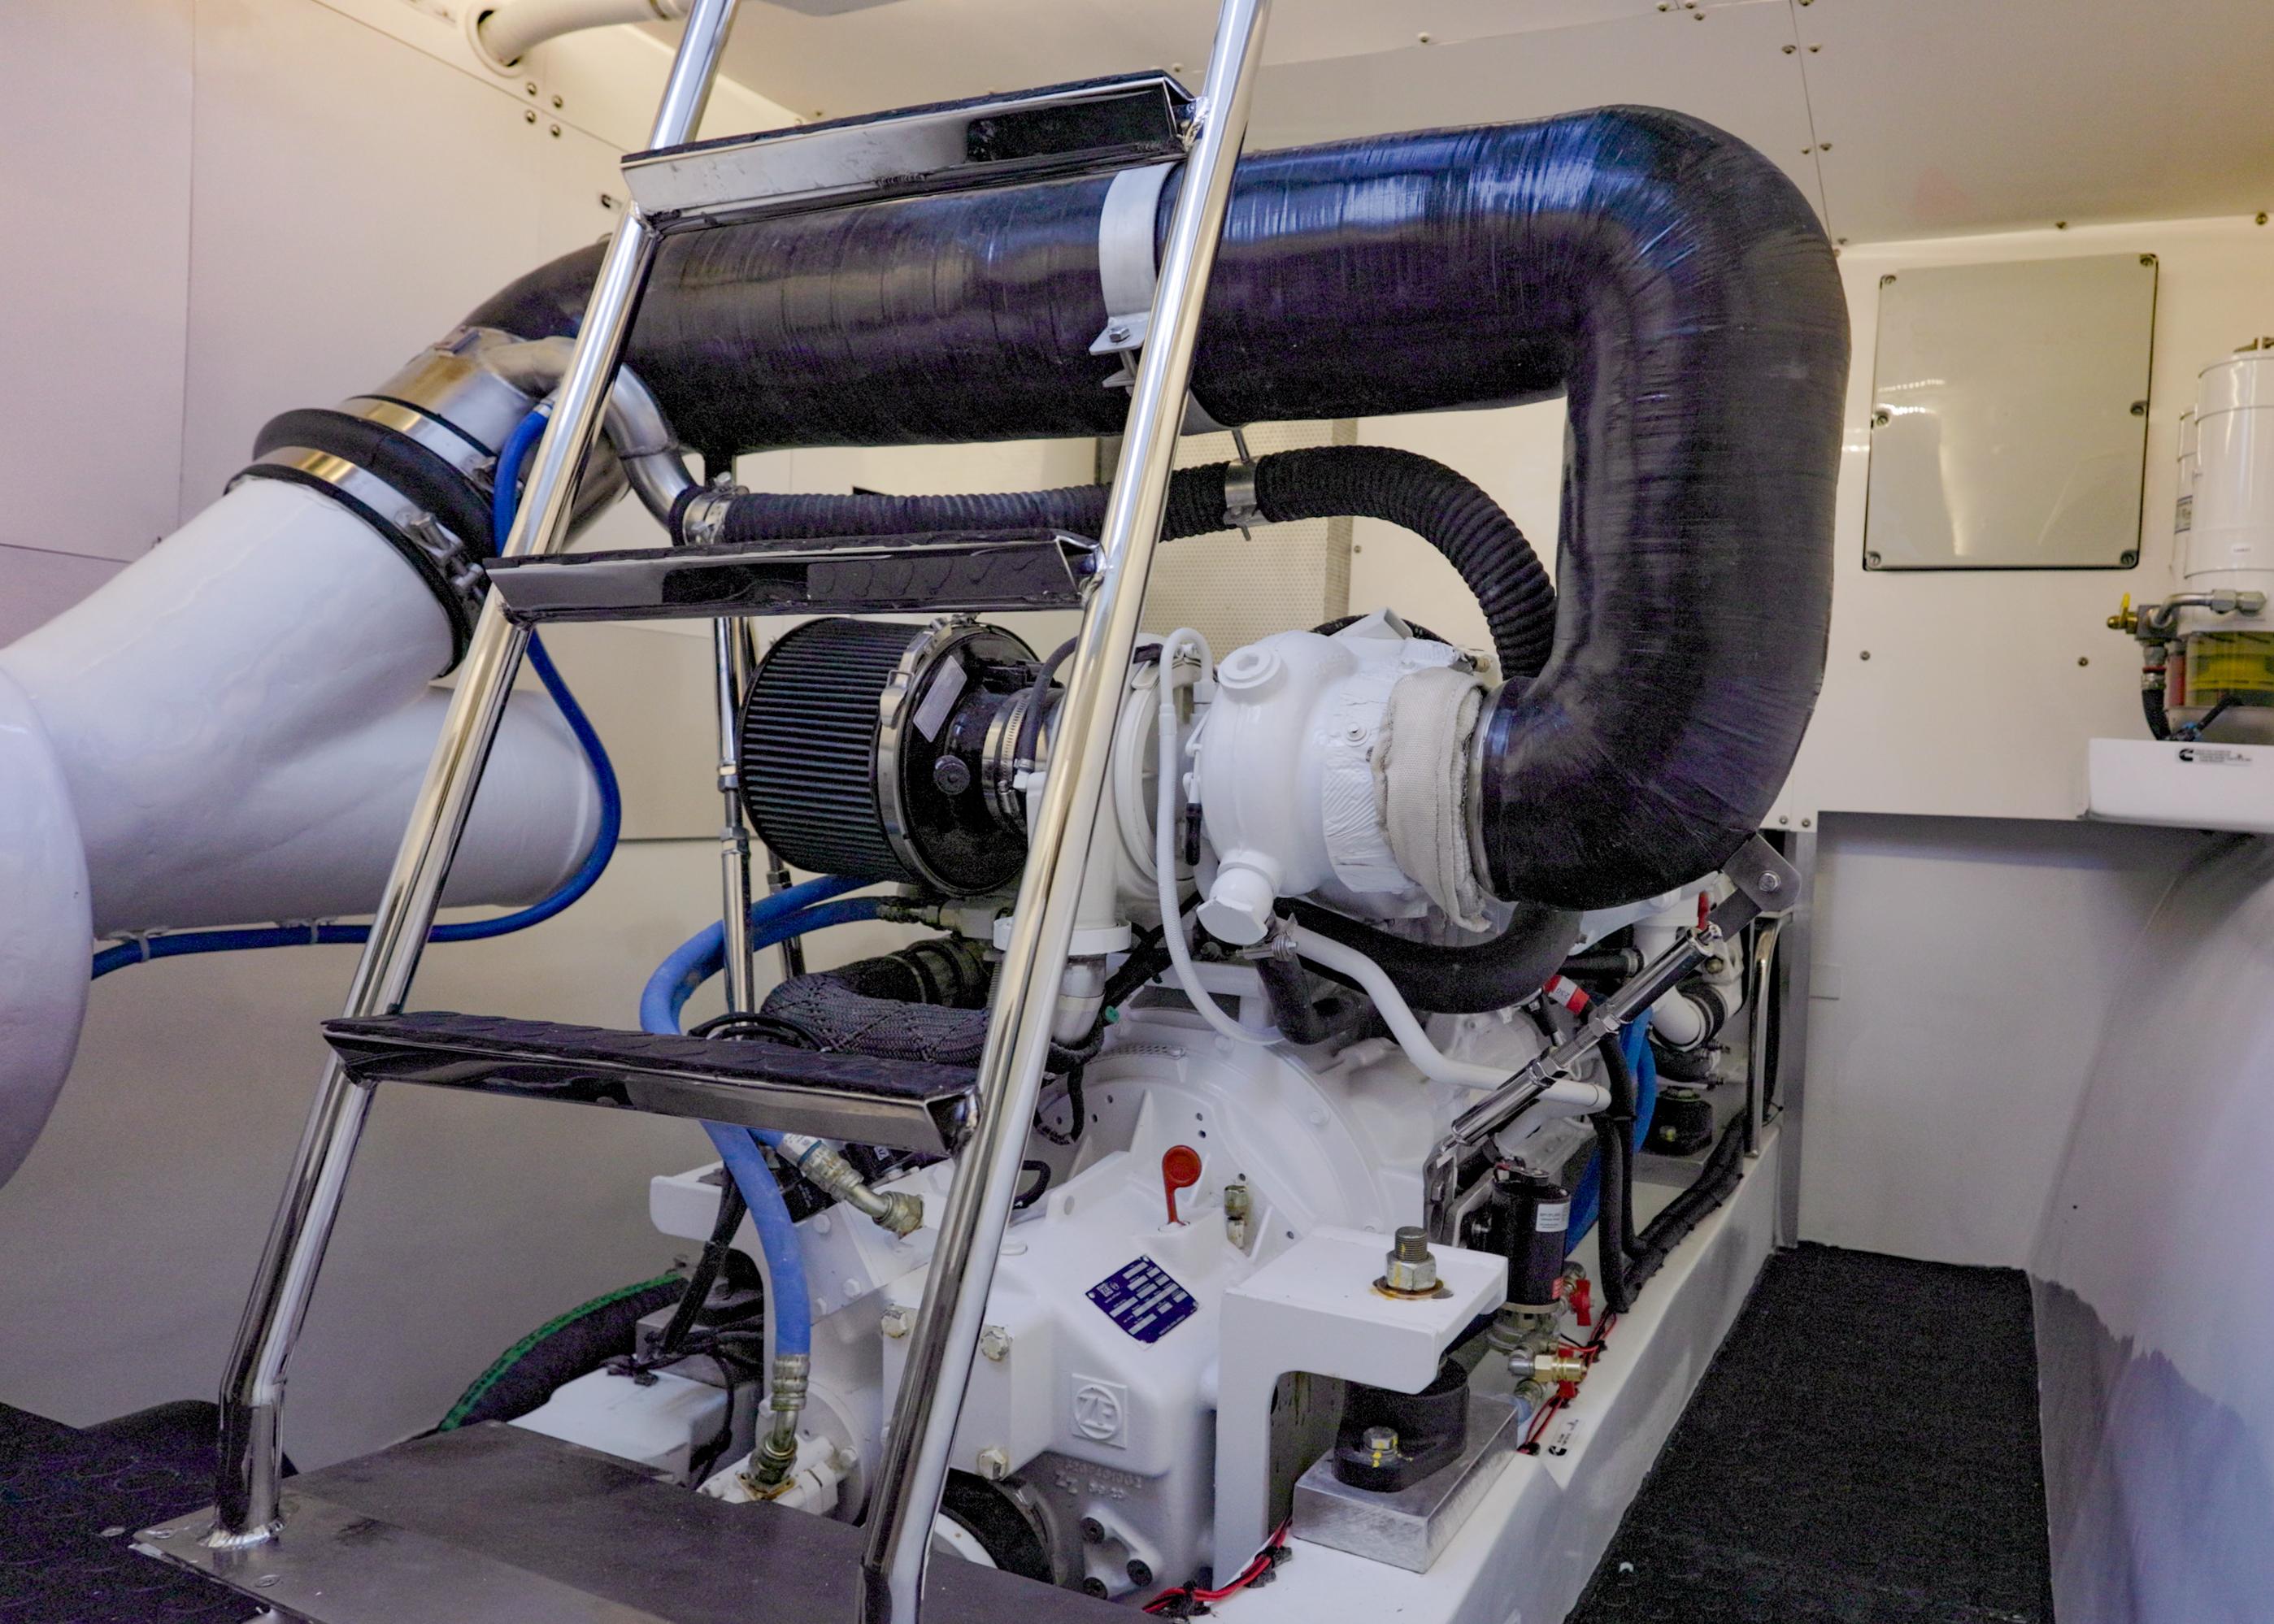 Two Oceans 555 Engine Room